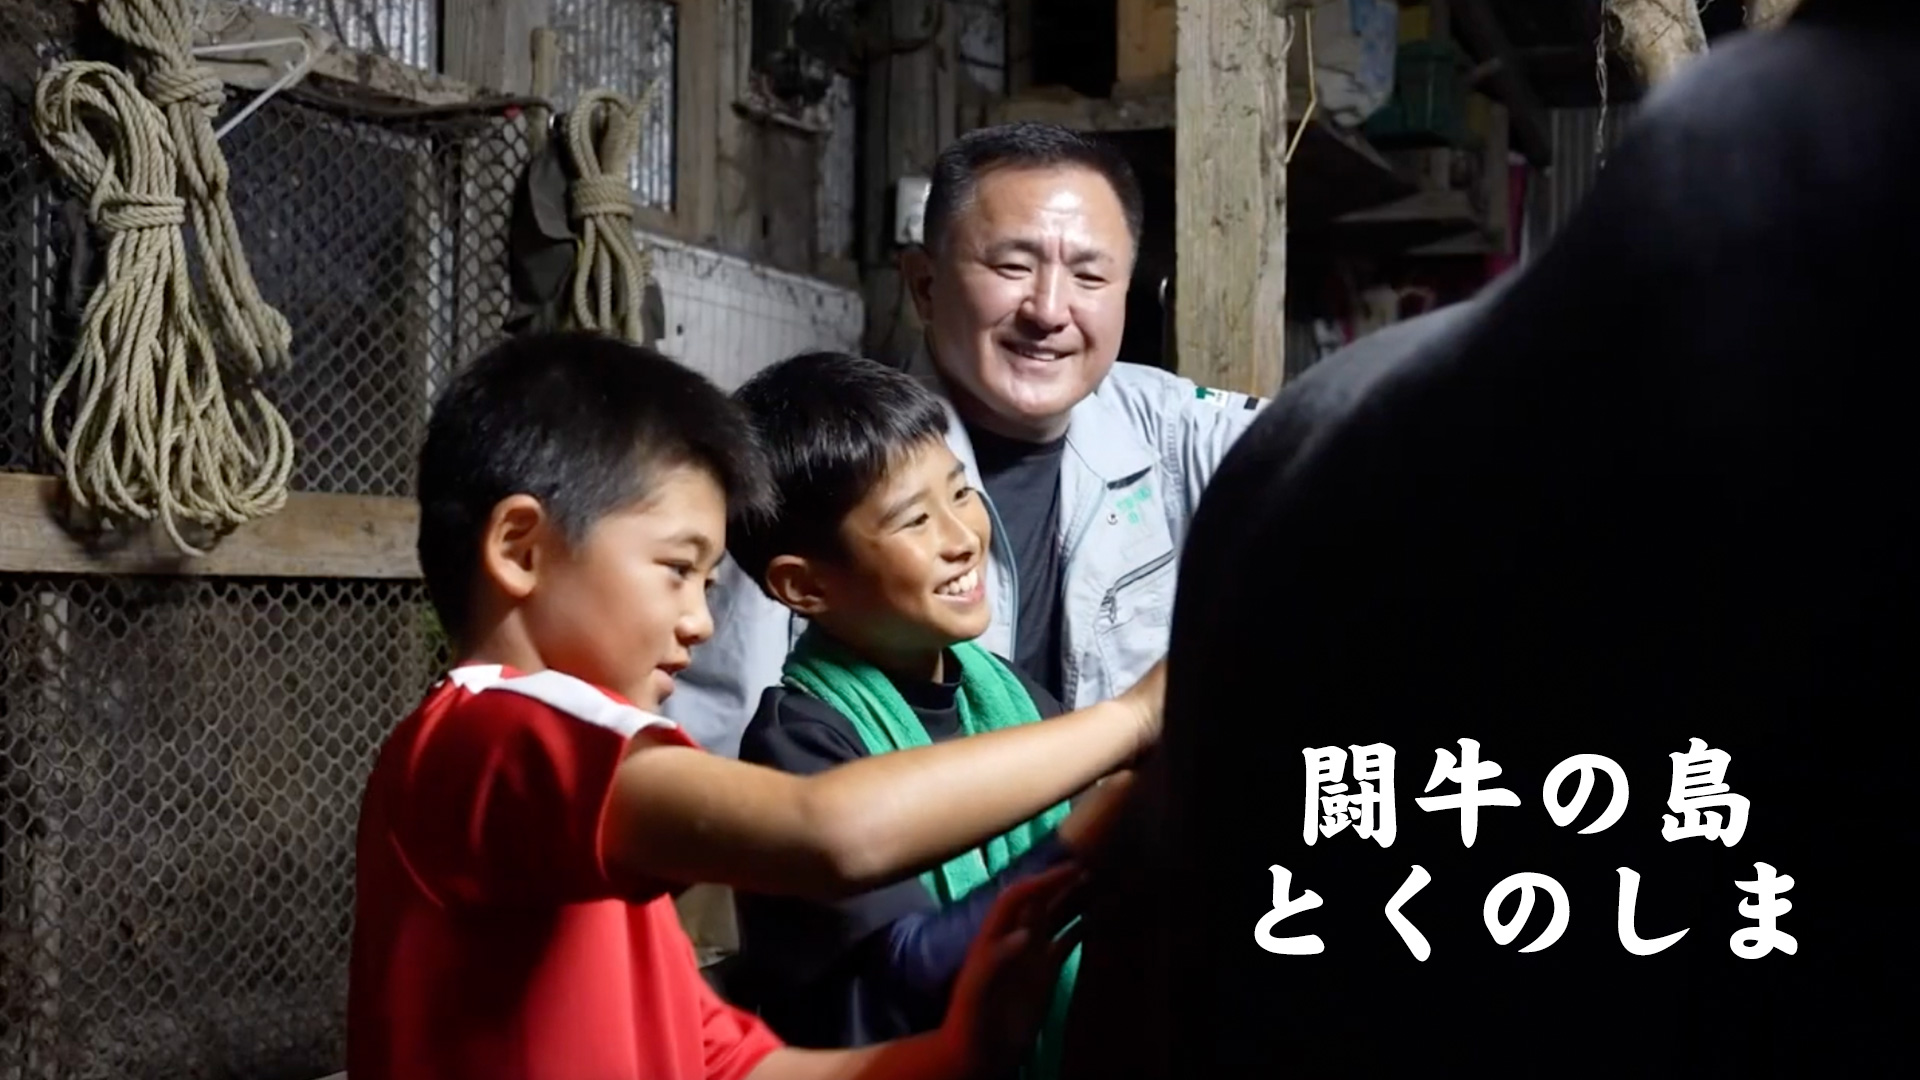 "Tokunoshima, the Island of Bullfighting"Picture of father with 2 boys taking care their bull.